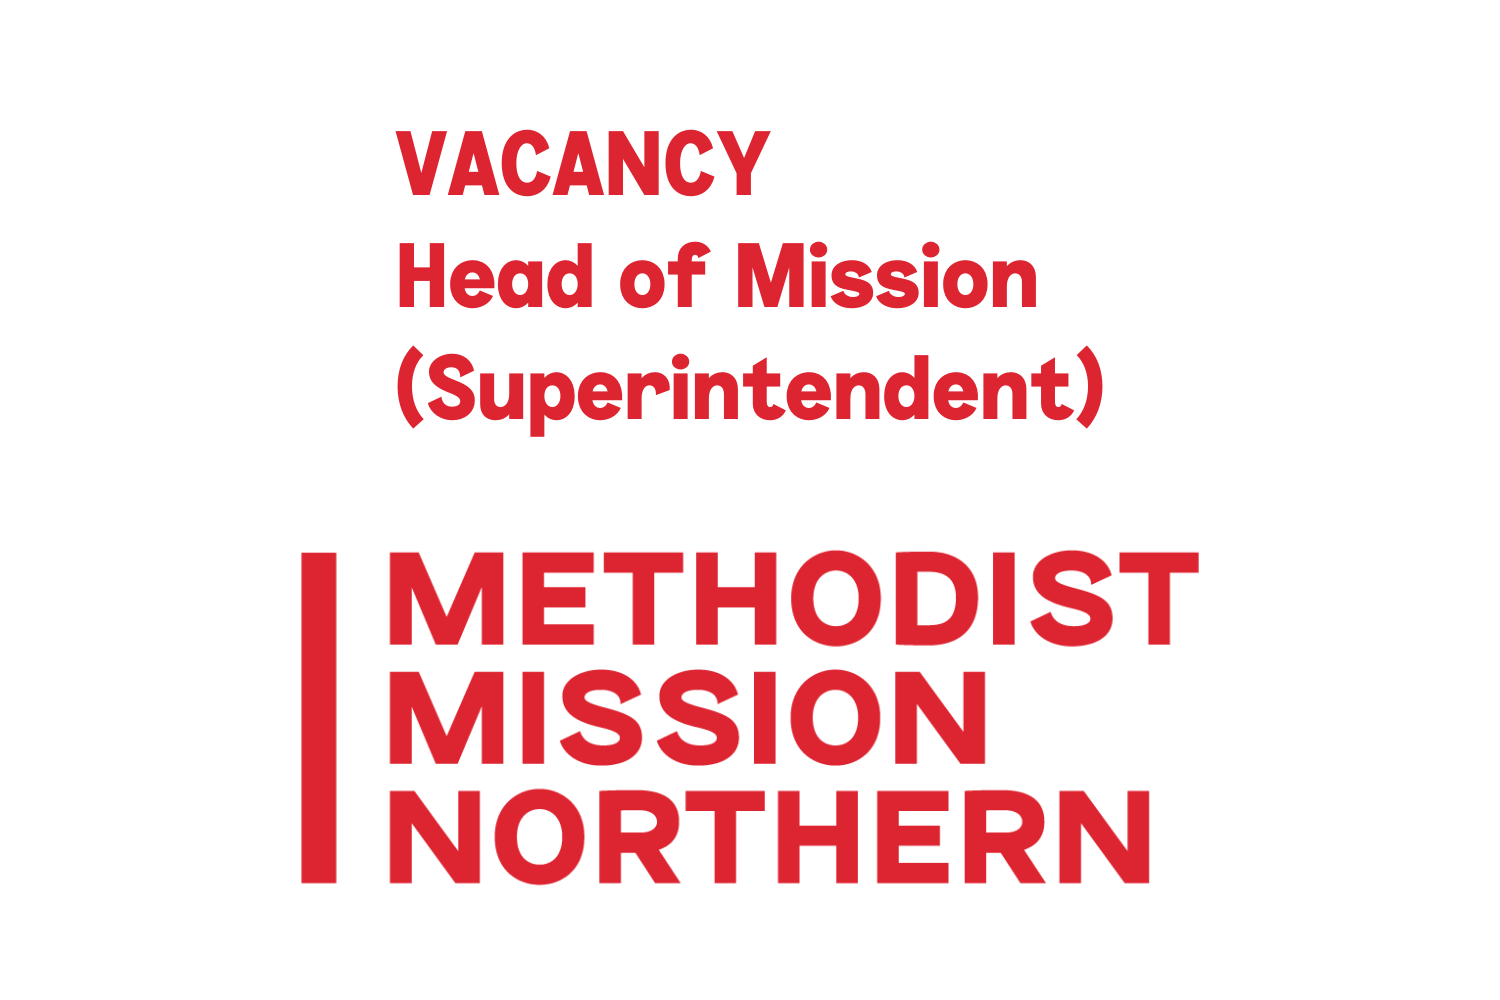 VACANCY: Head of Mission